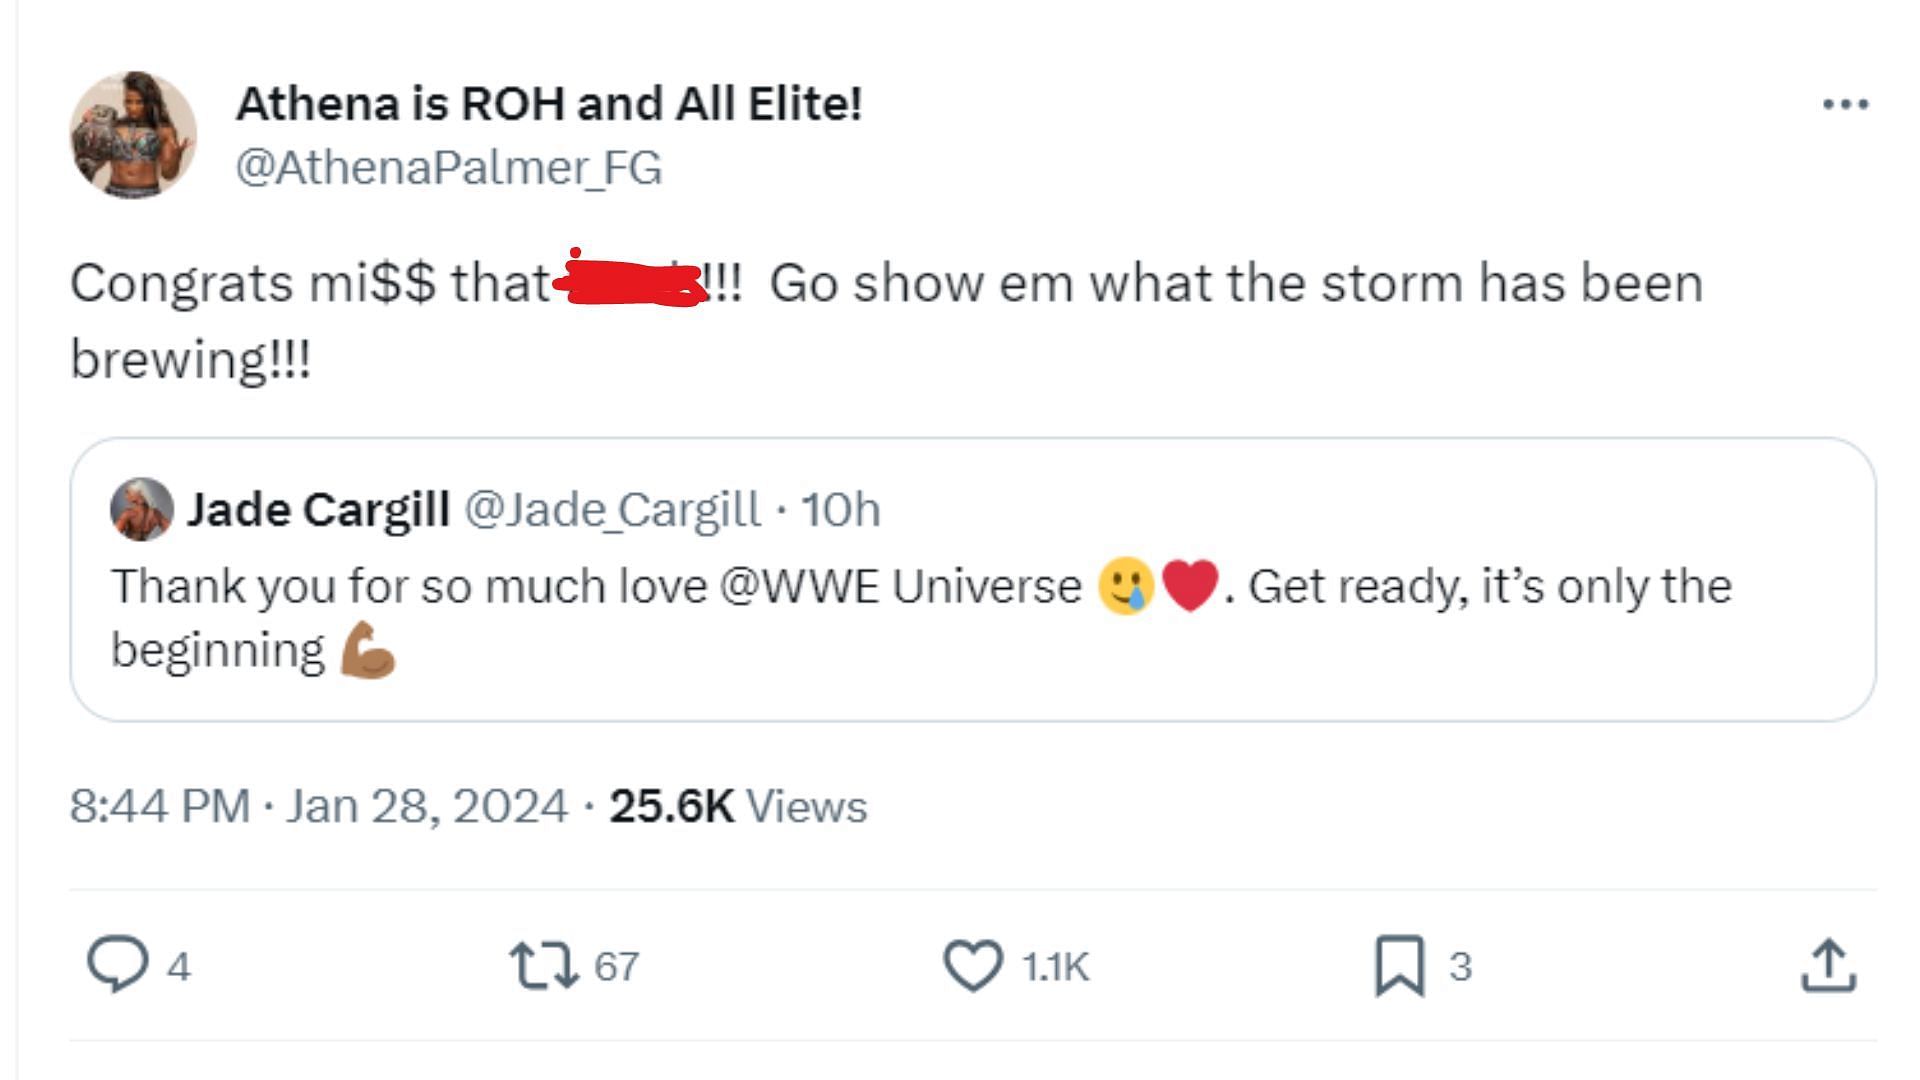 Athena congratulated Jade Cargill on her Royal Rumble debut